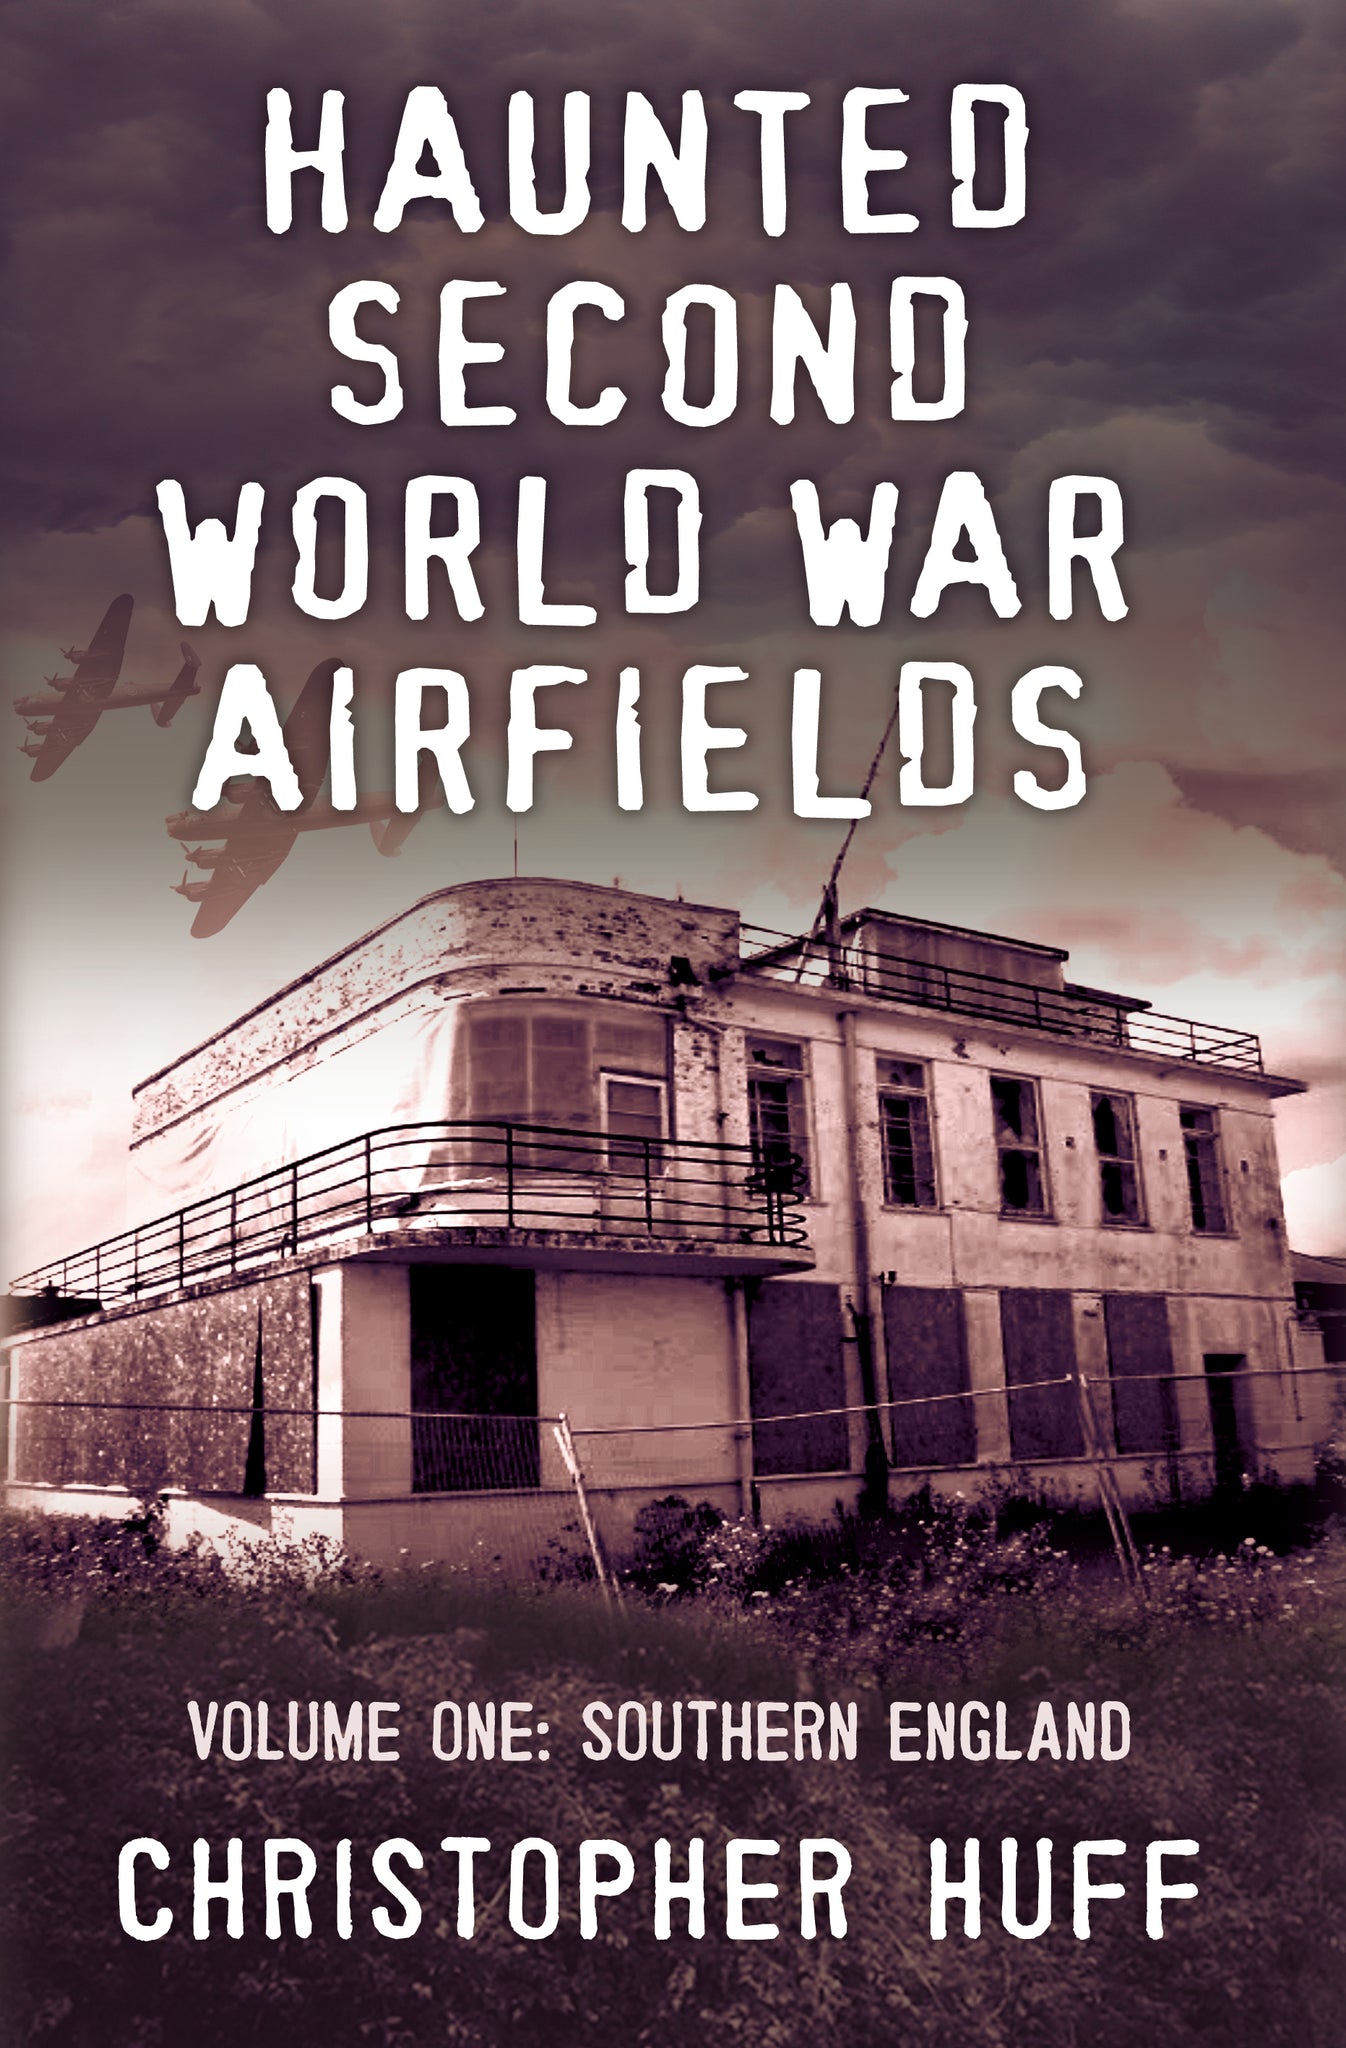 Haunted Second World War Airfields: Volume One: Southern England